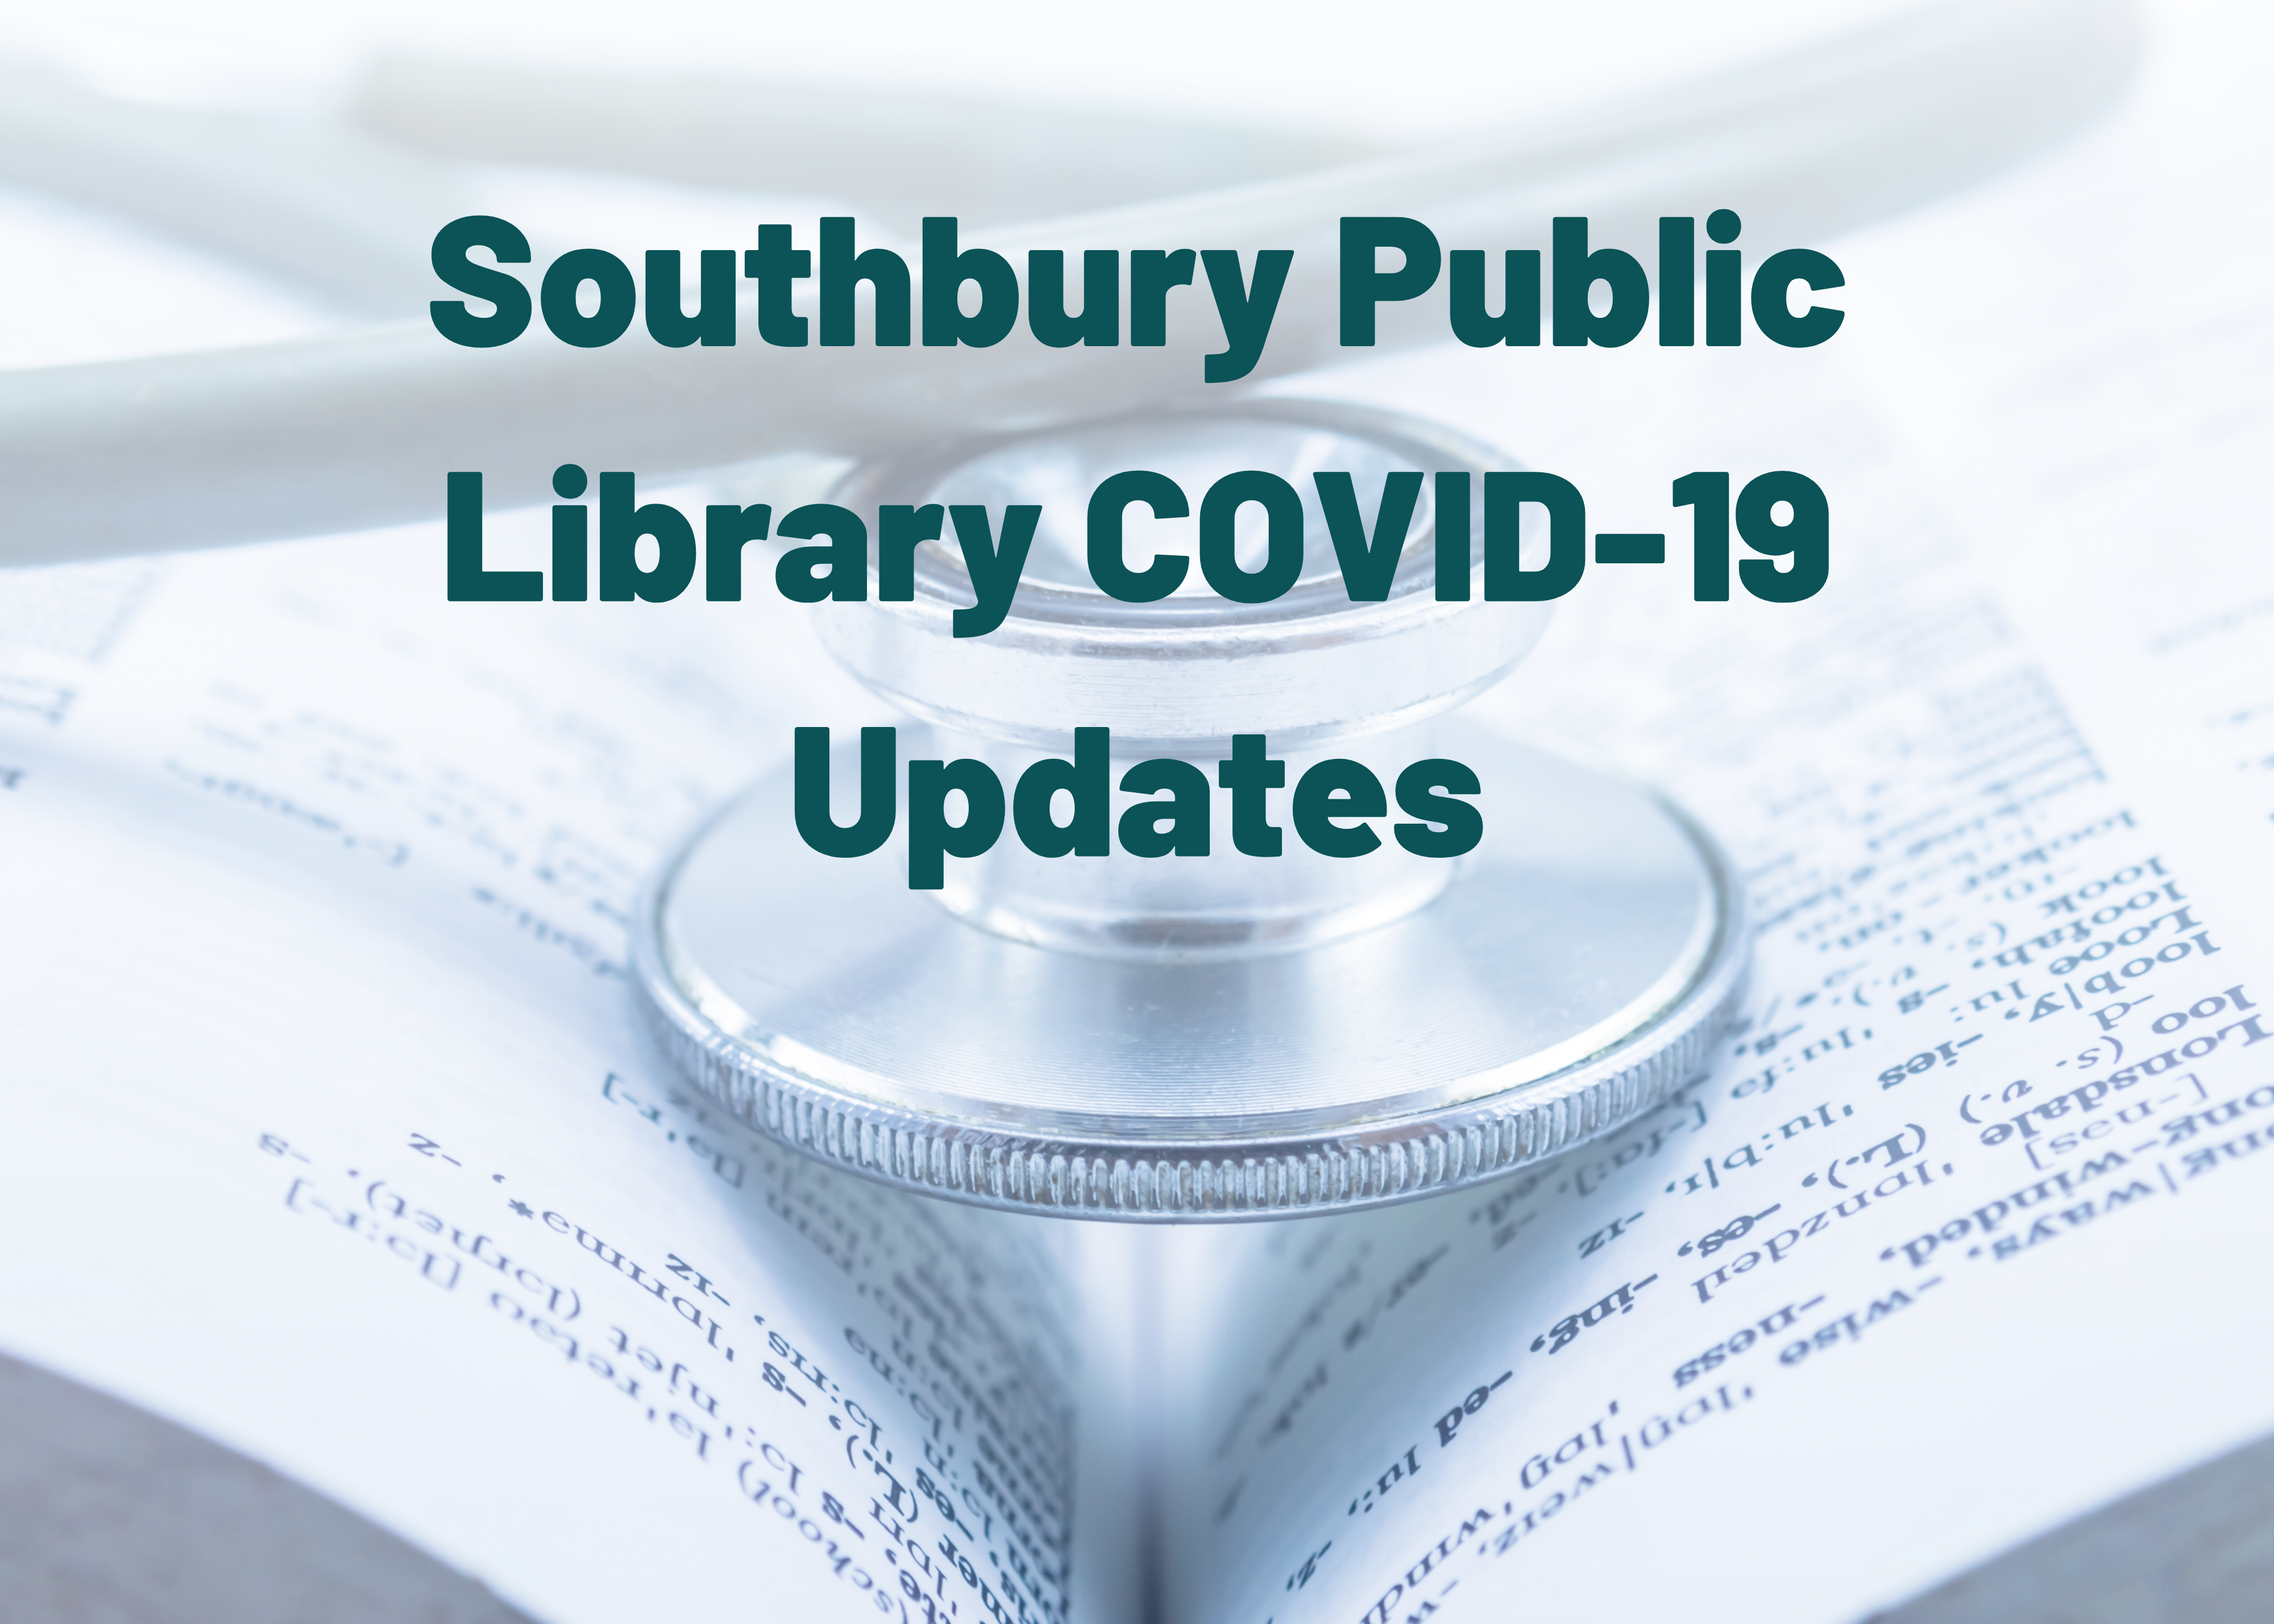 Text that reads "Southbury Public Library COVID-19 Updates"